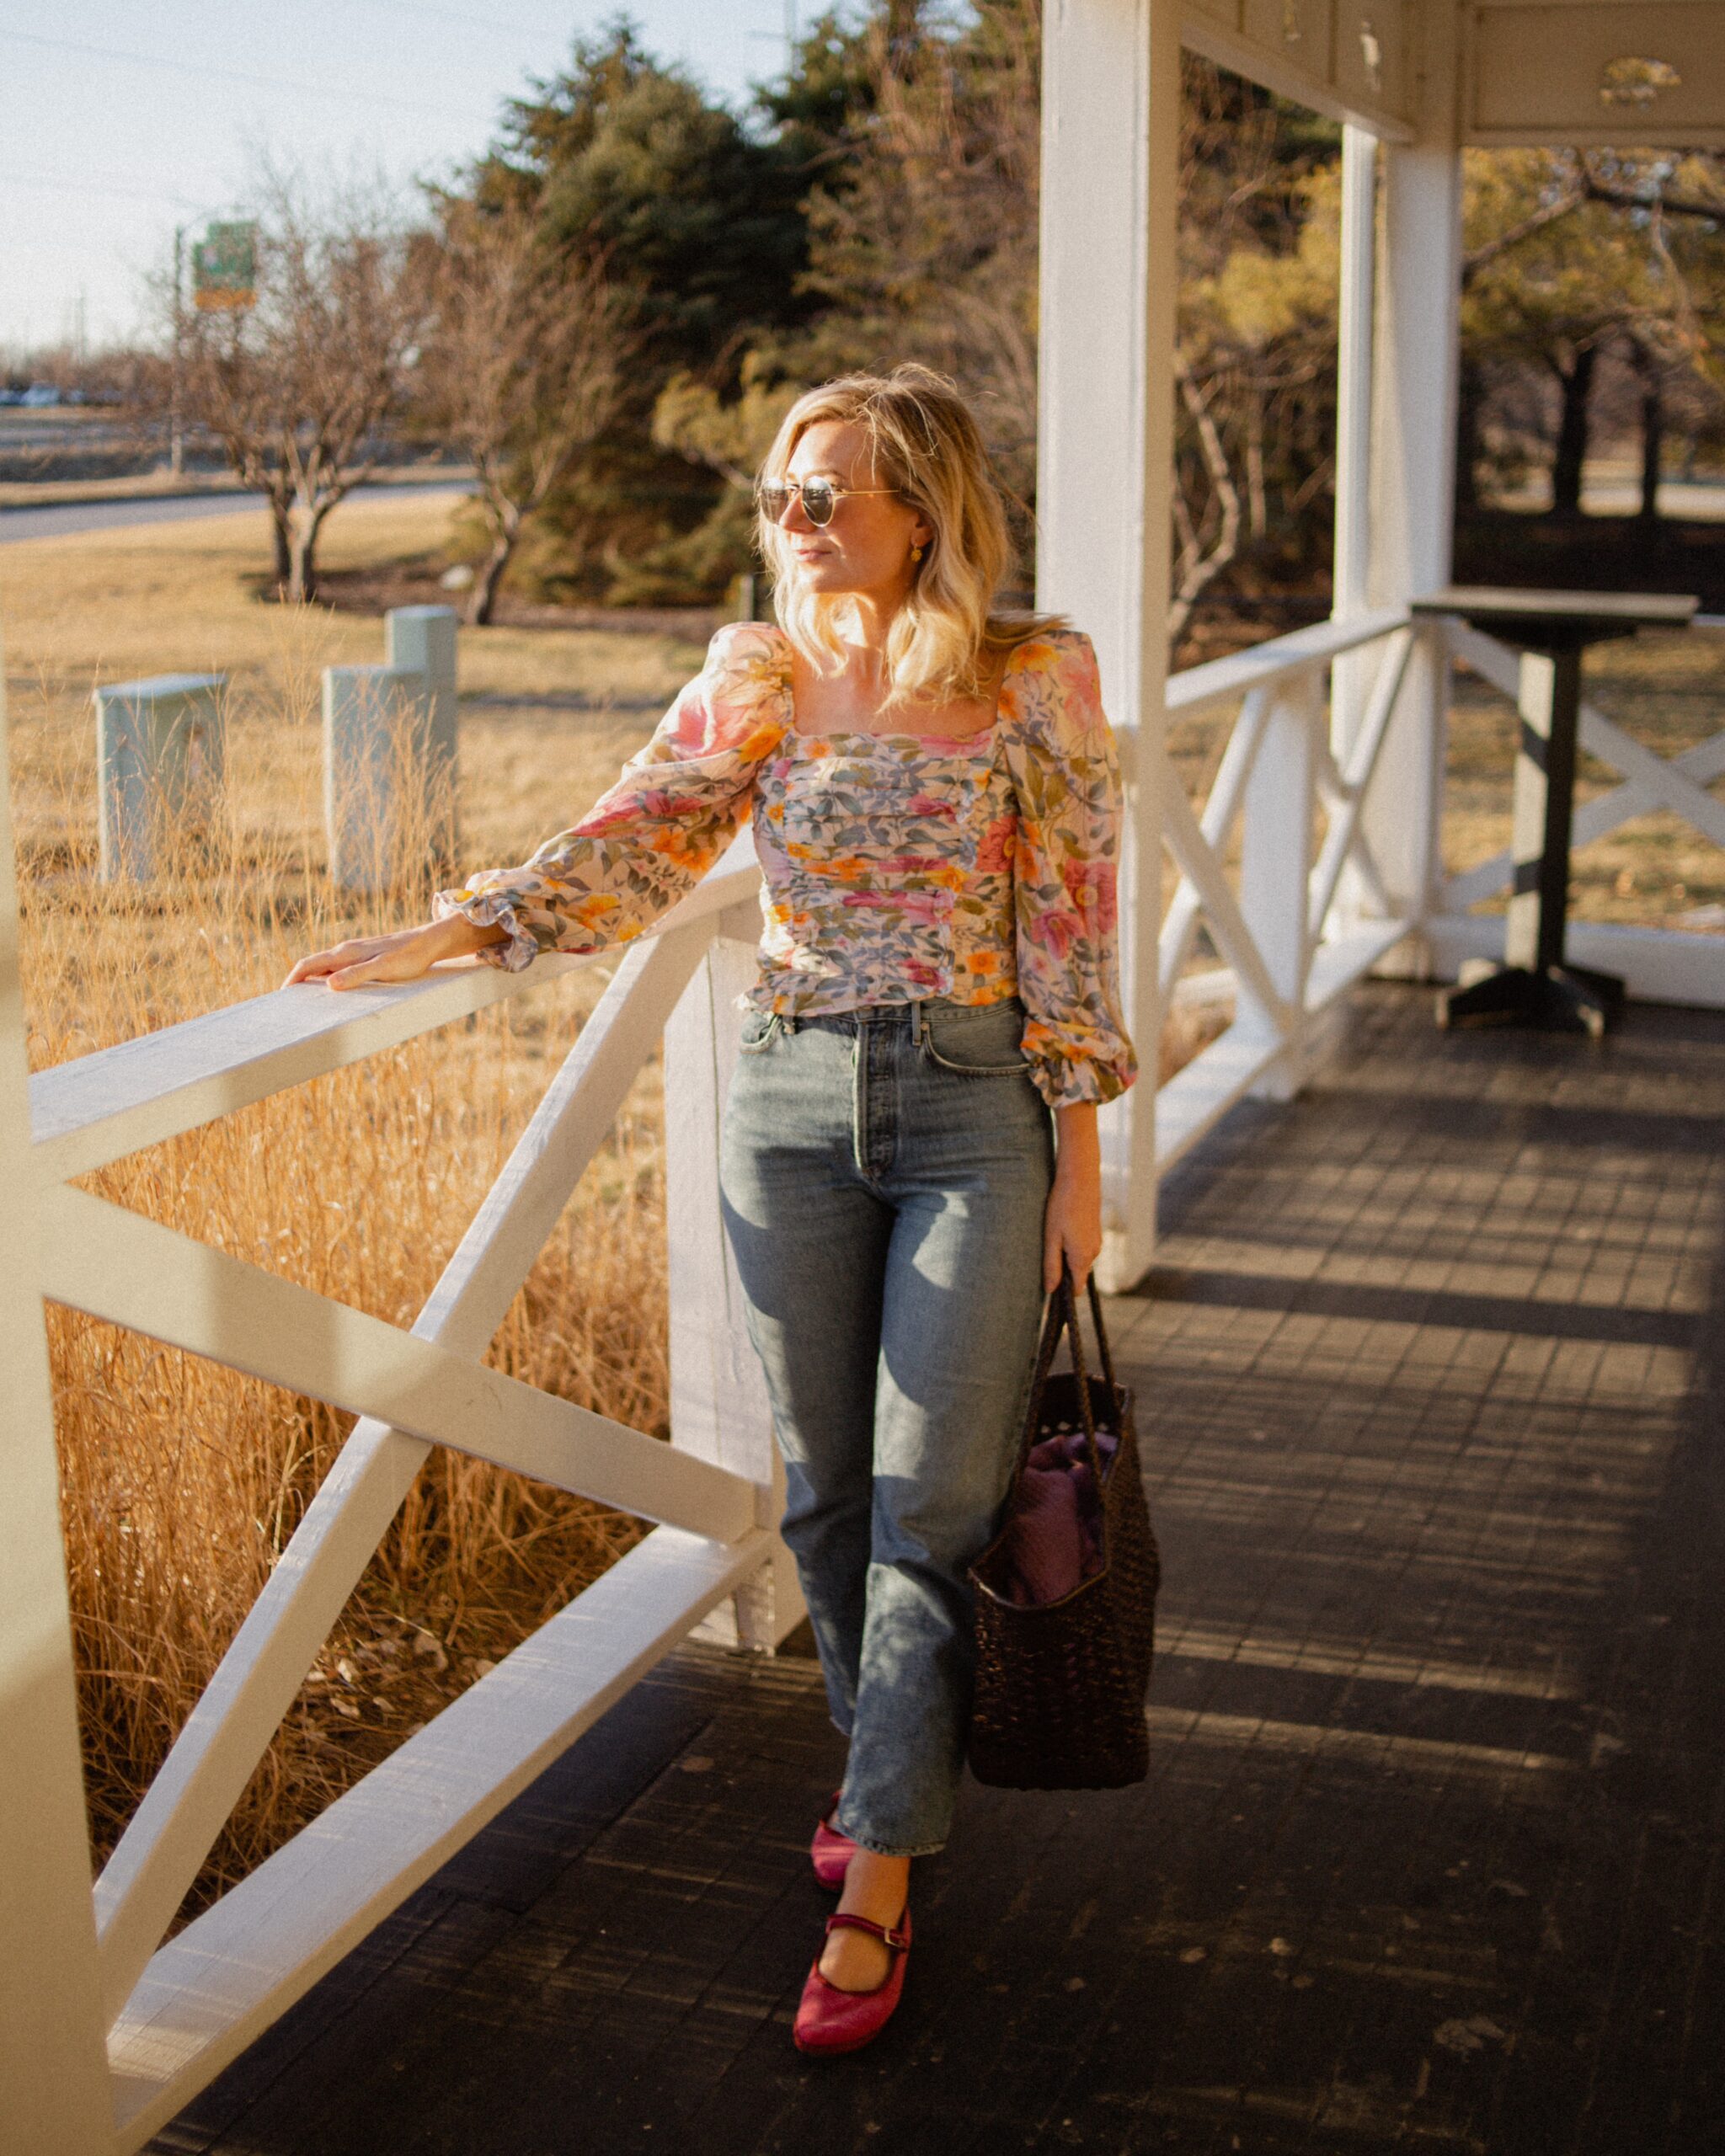 Karin Emily wears a floral puff sleeve top from the Shopbop Style Event with Citizens of Humanity Charlotte Jeans, Pink Mary Jane Flats, and a Dragon Diffusion Bag